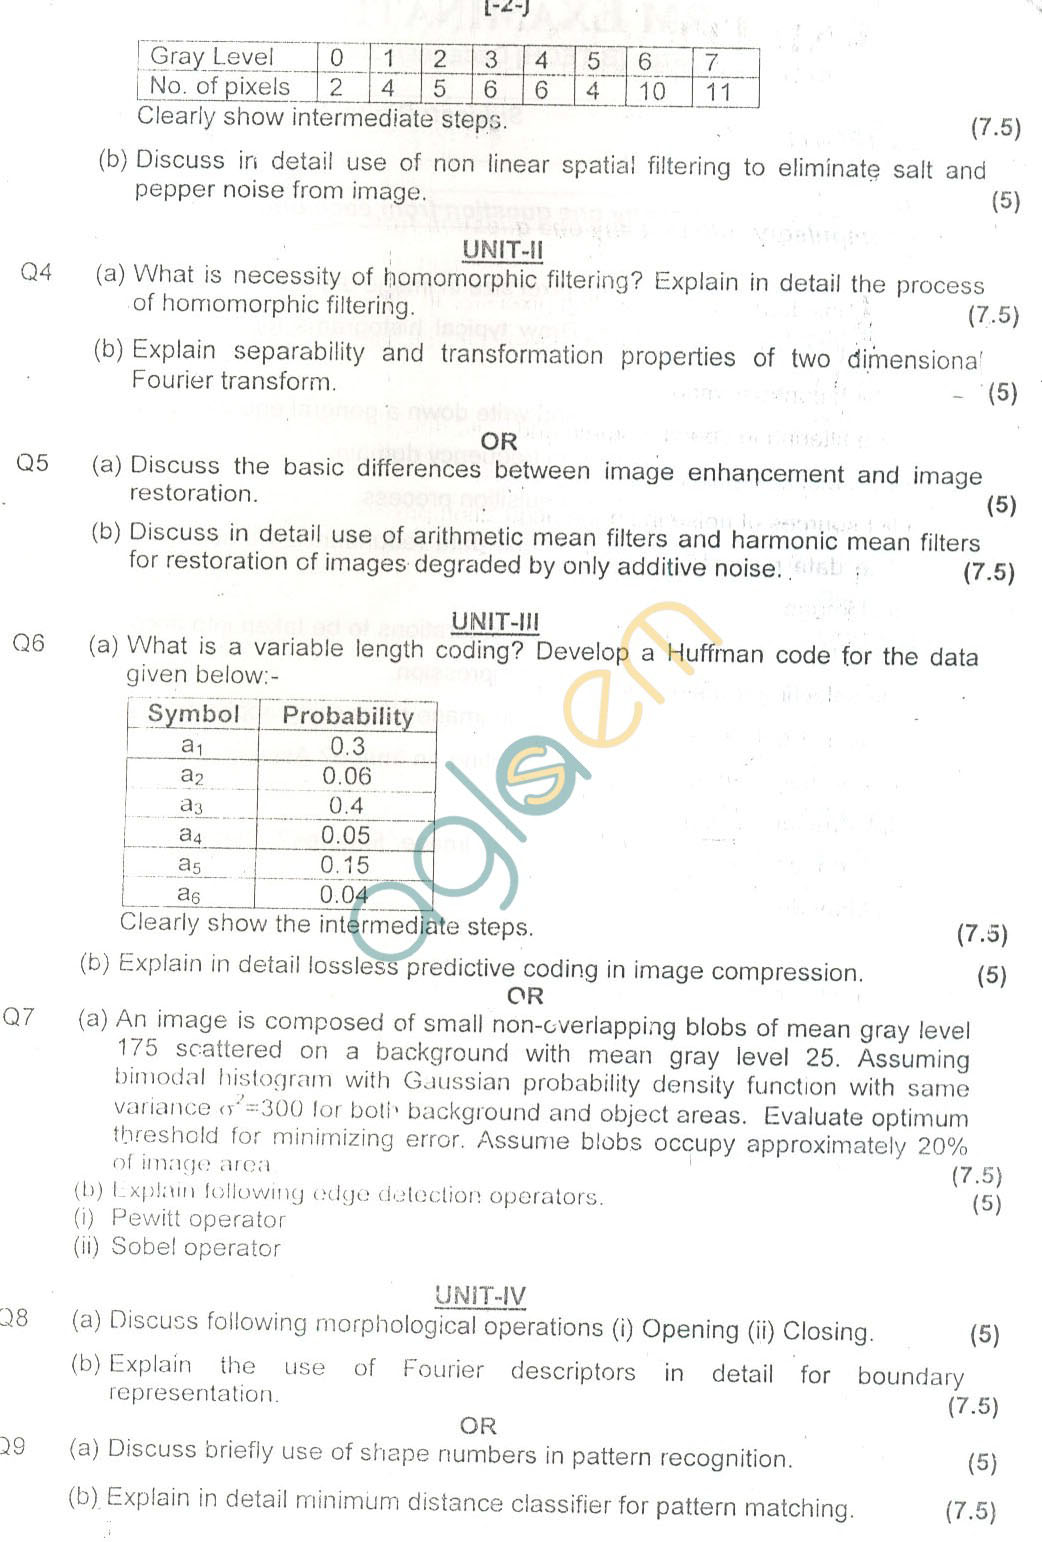 GGSIPU: Question Papers Seventh Semester – end Term 2007 – ETEC-411